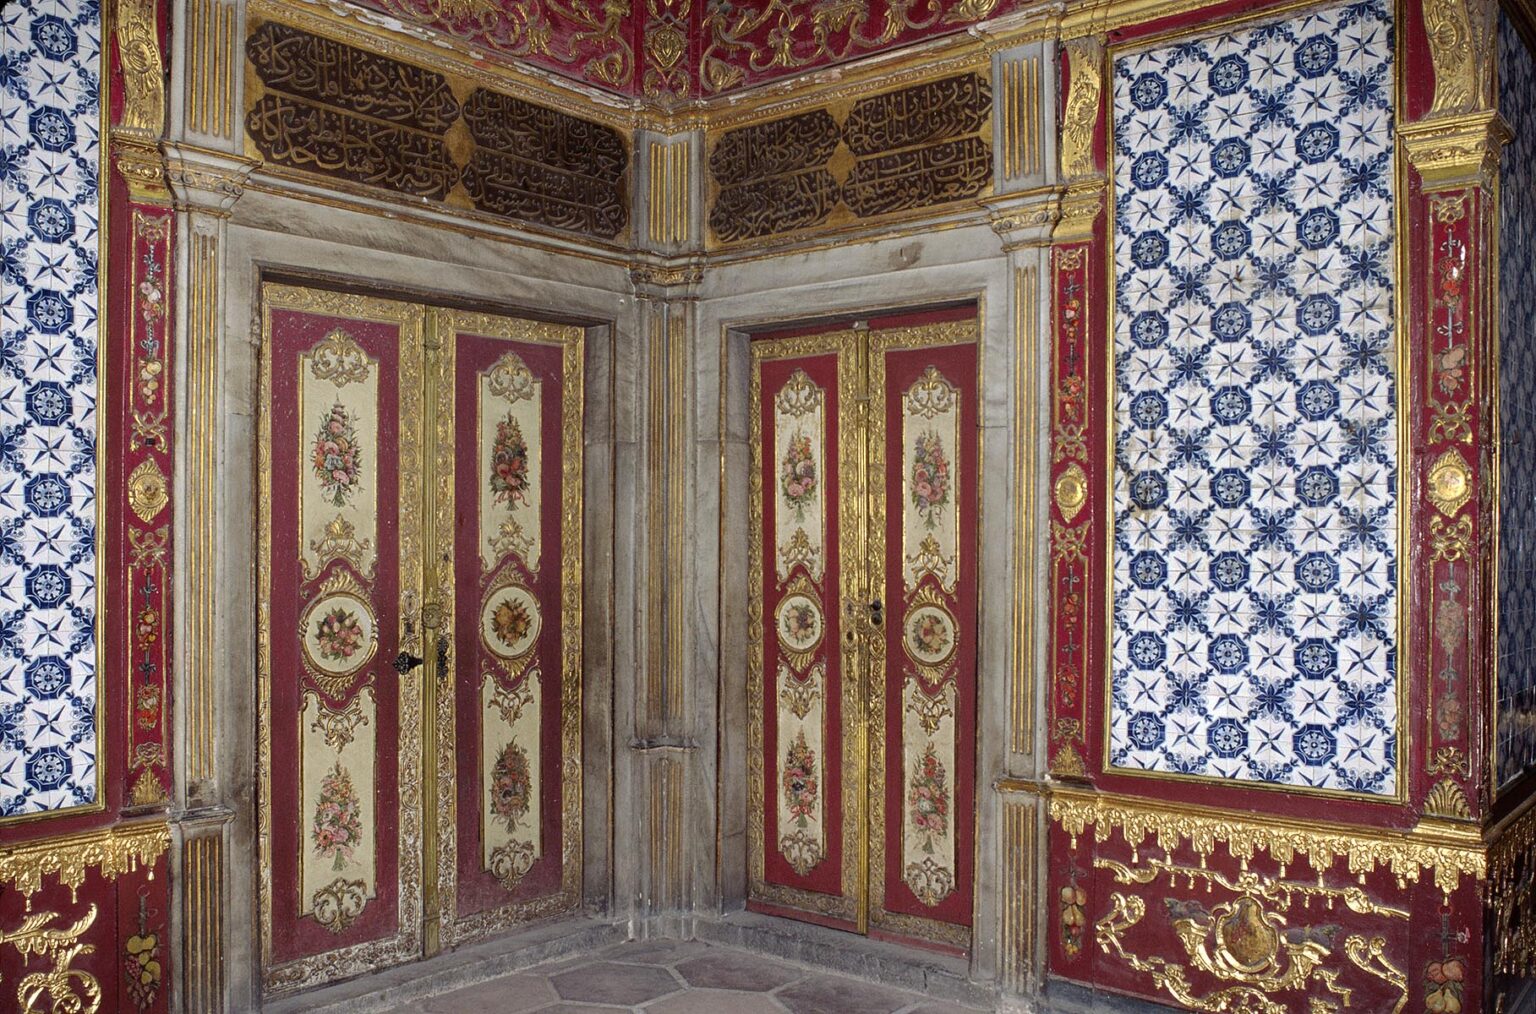 One of the  beautifully painted, tiled, and decorated sitting rooms of The Harem - Topkapi Palace (Ottoman Empire), Istanbul